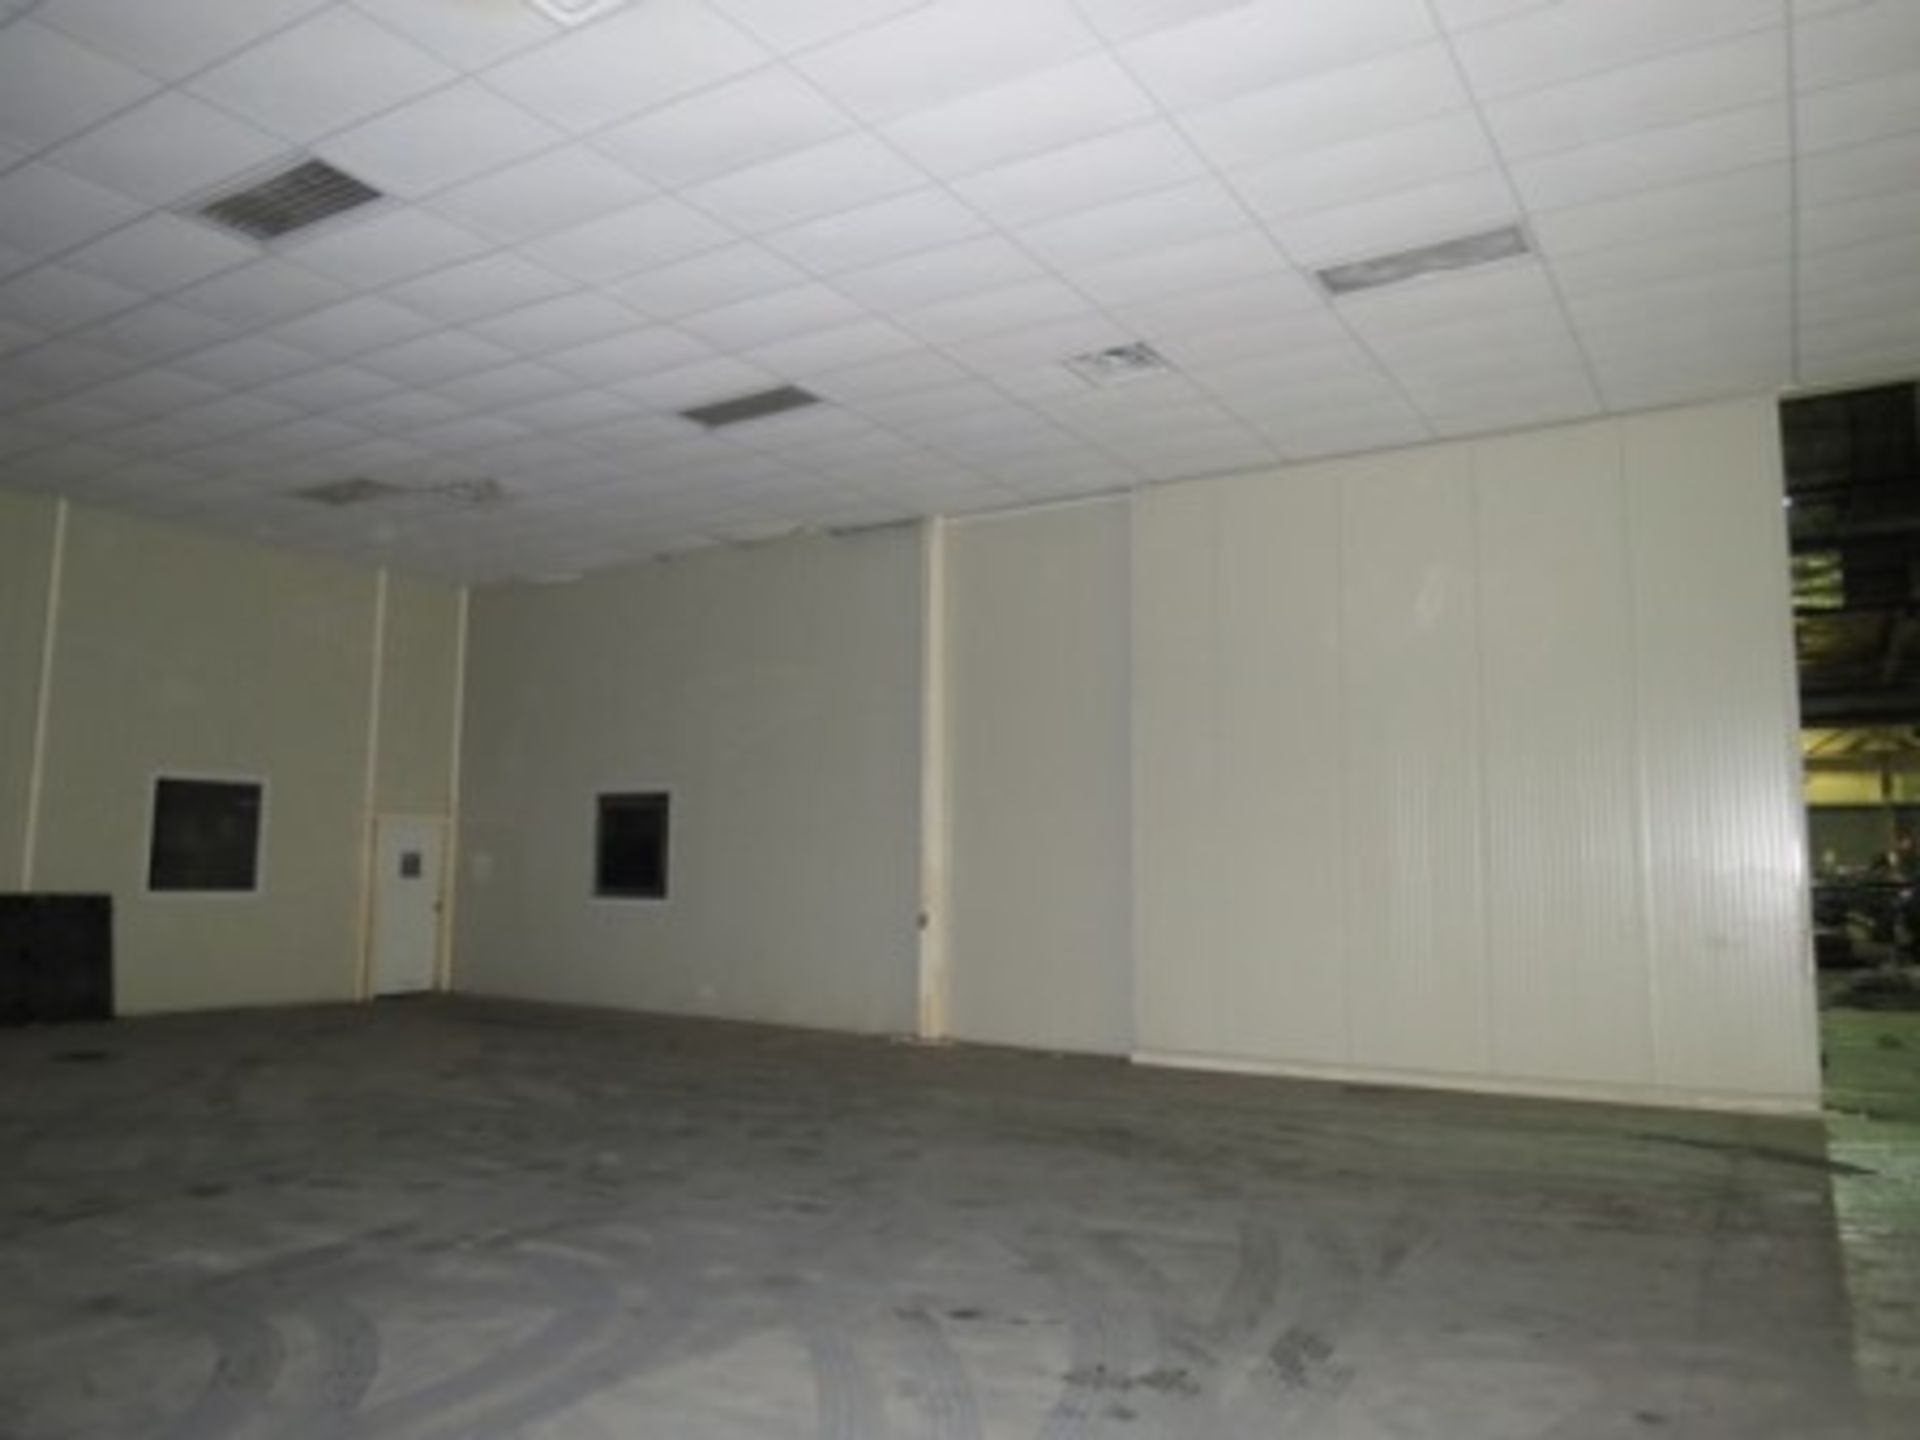 Metal room for Cleanroom, 18.3 x 36.6 x 5 m., (2) gates, (2) doors, (4)windows, celling and lamps. - Image 9 of 15